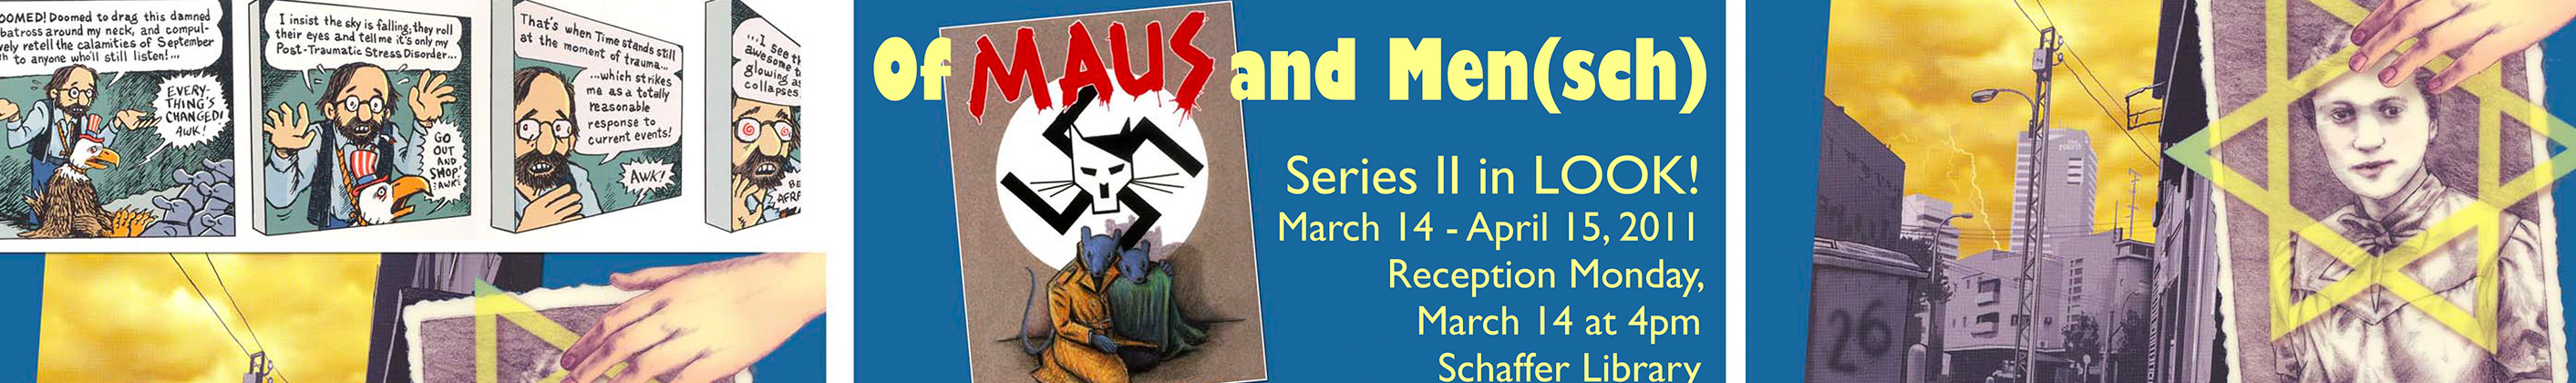 Graphic novel series ii of MAUS and mensch banner